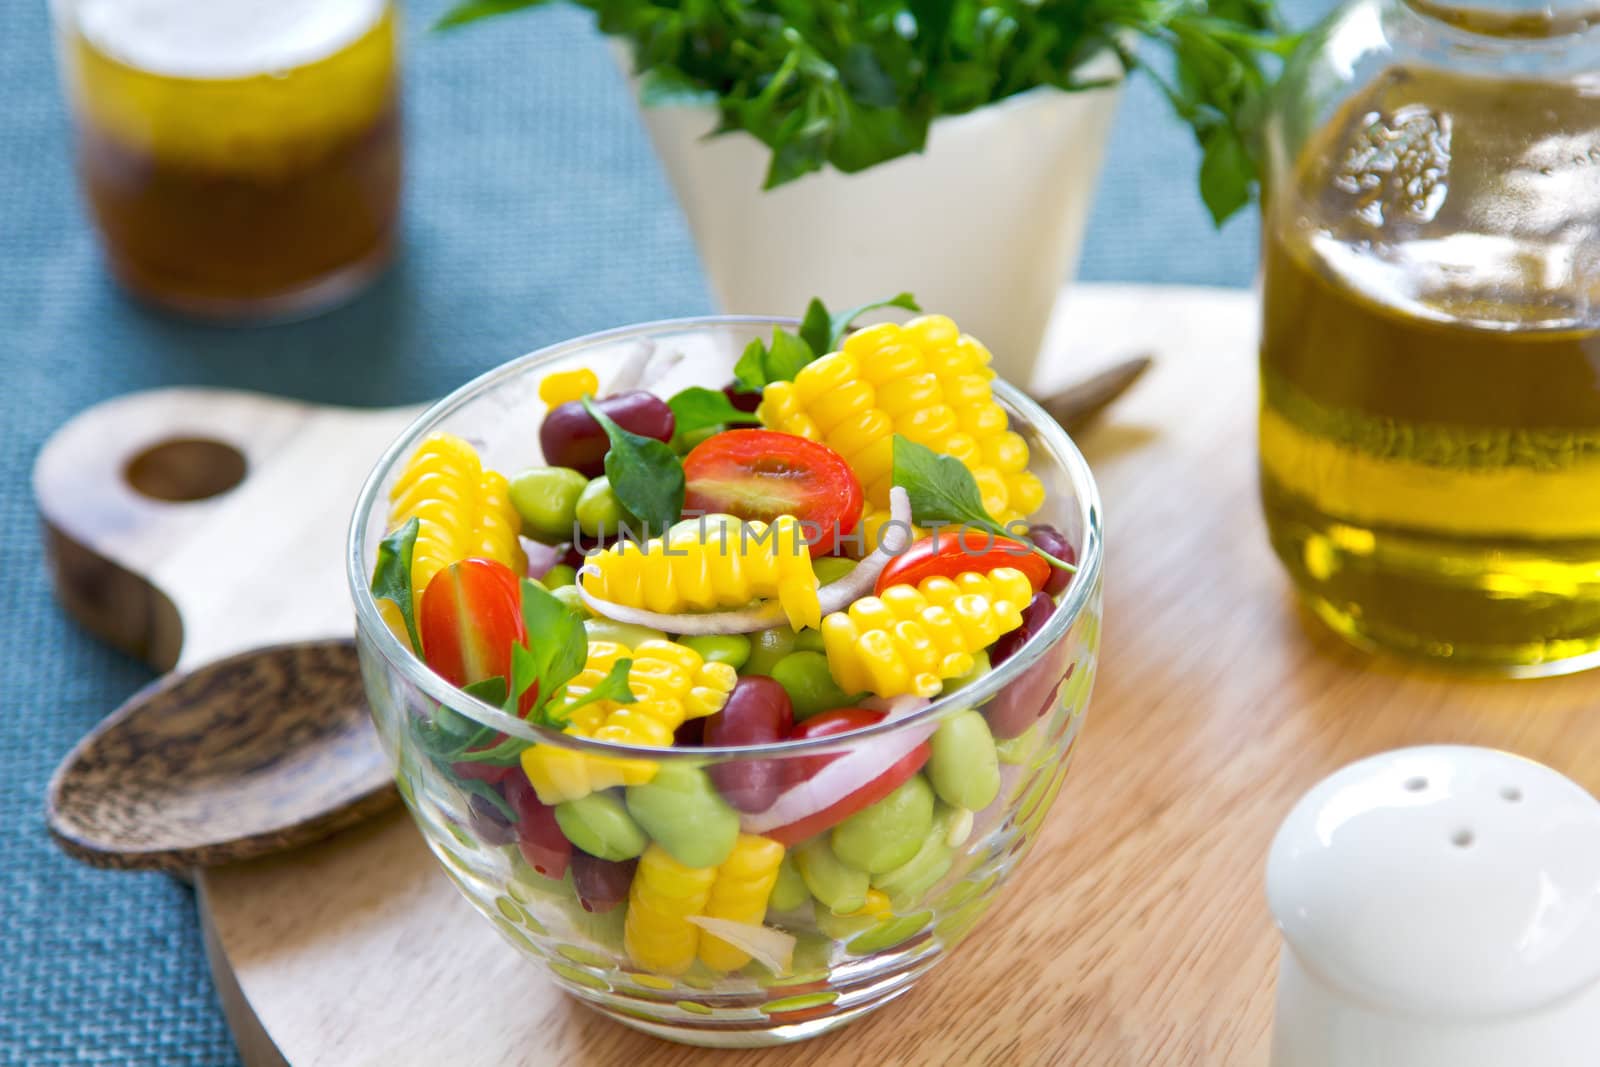 Varieties of Beans, sweet corn and tomato  salad